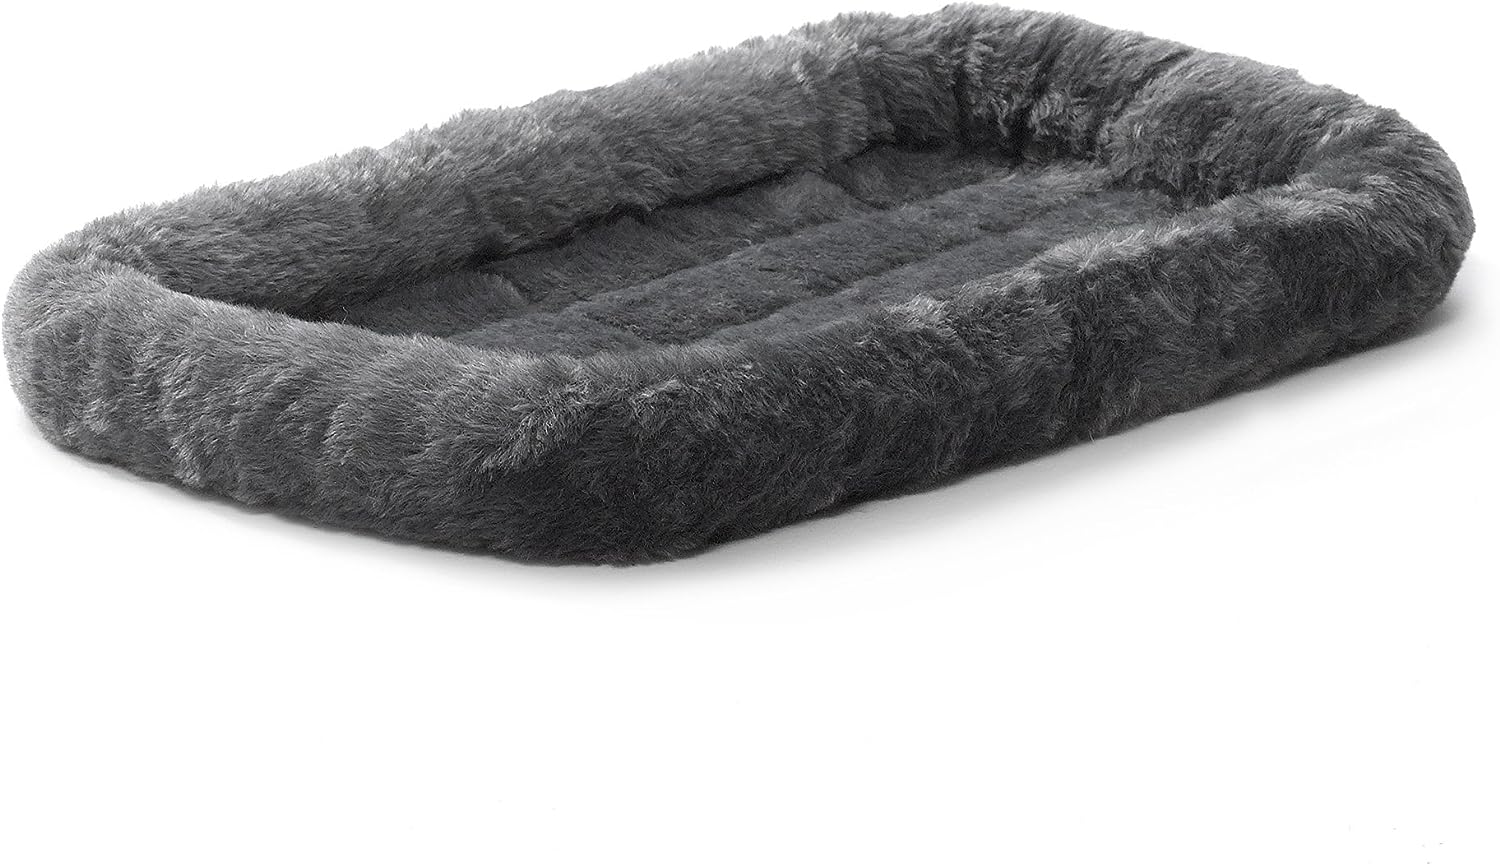 Midwest Homes for Pets Bolster Dog Bed - 18-Inch Gray Bed for Dogs and Cats with Comfortable Bolster